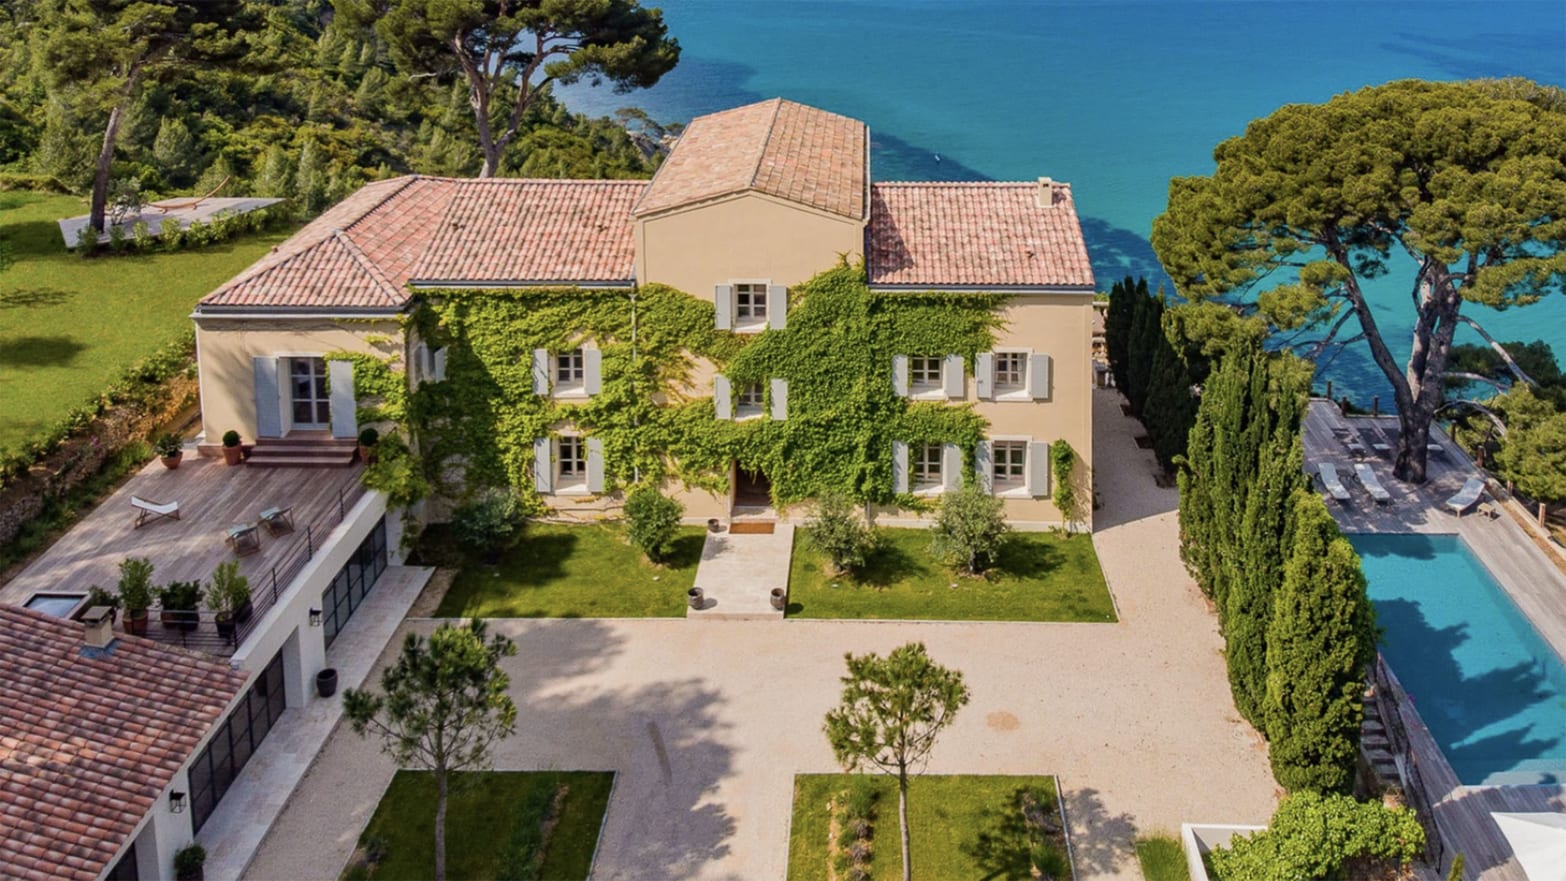 HOUSE OF THE DAY: Coco Chanel's Summer Home on the French Riviera